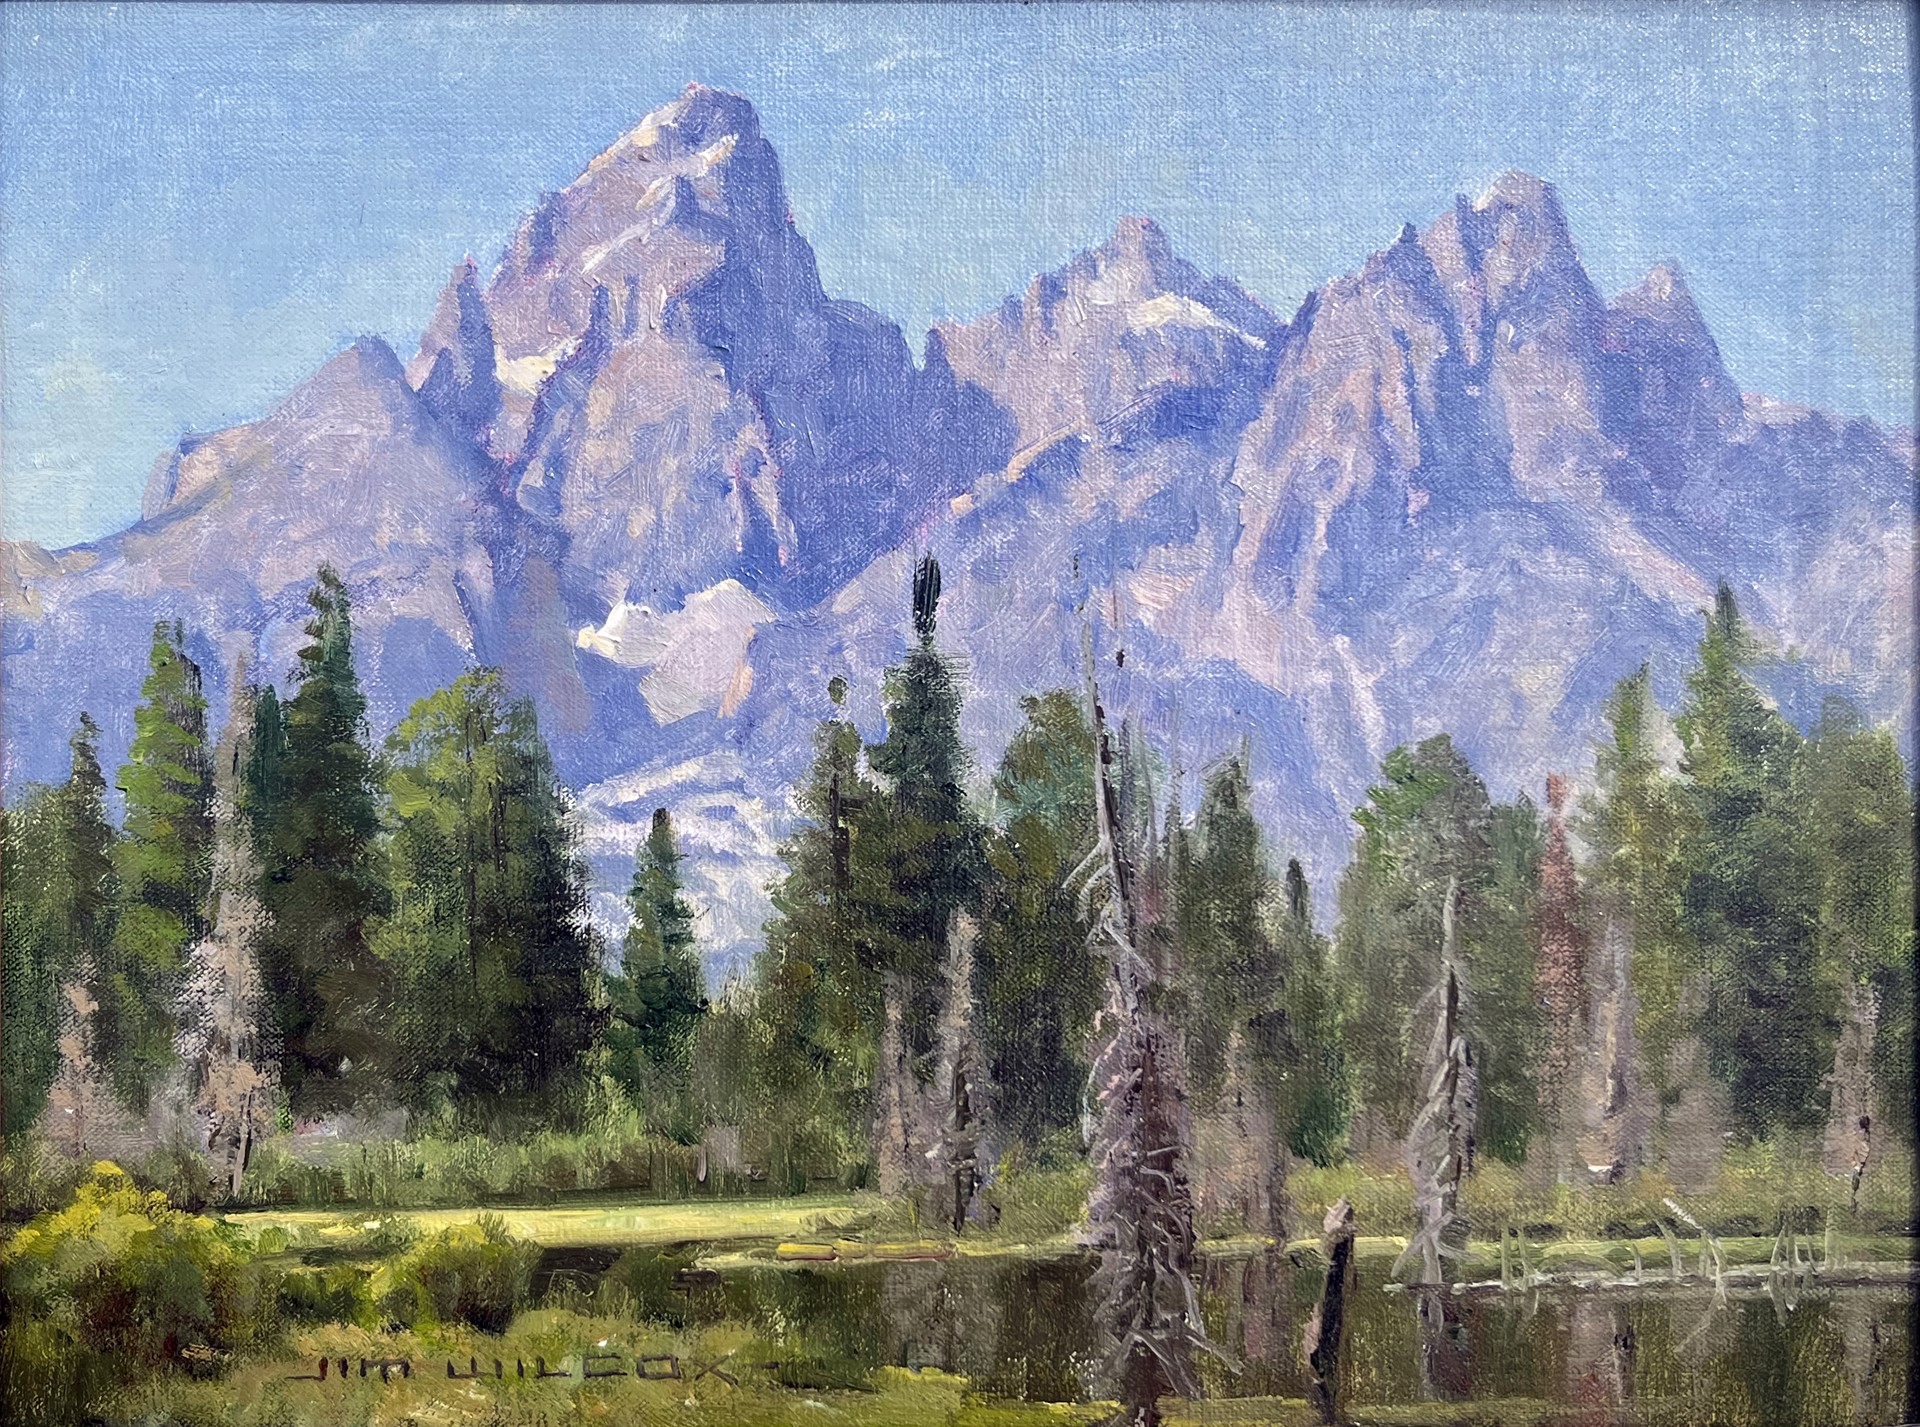 Schwabacher Landing and signed Wilcox Book by Jim Wilcox